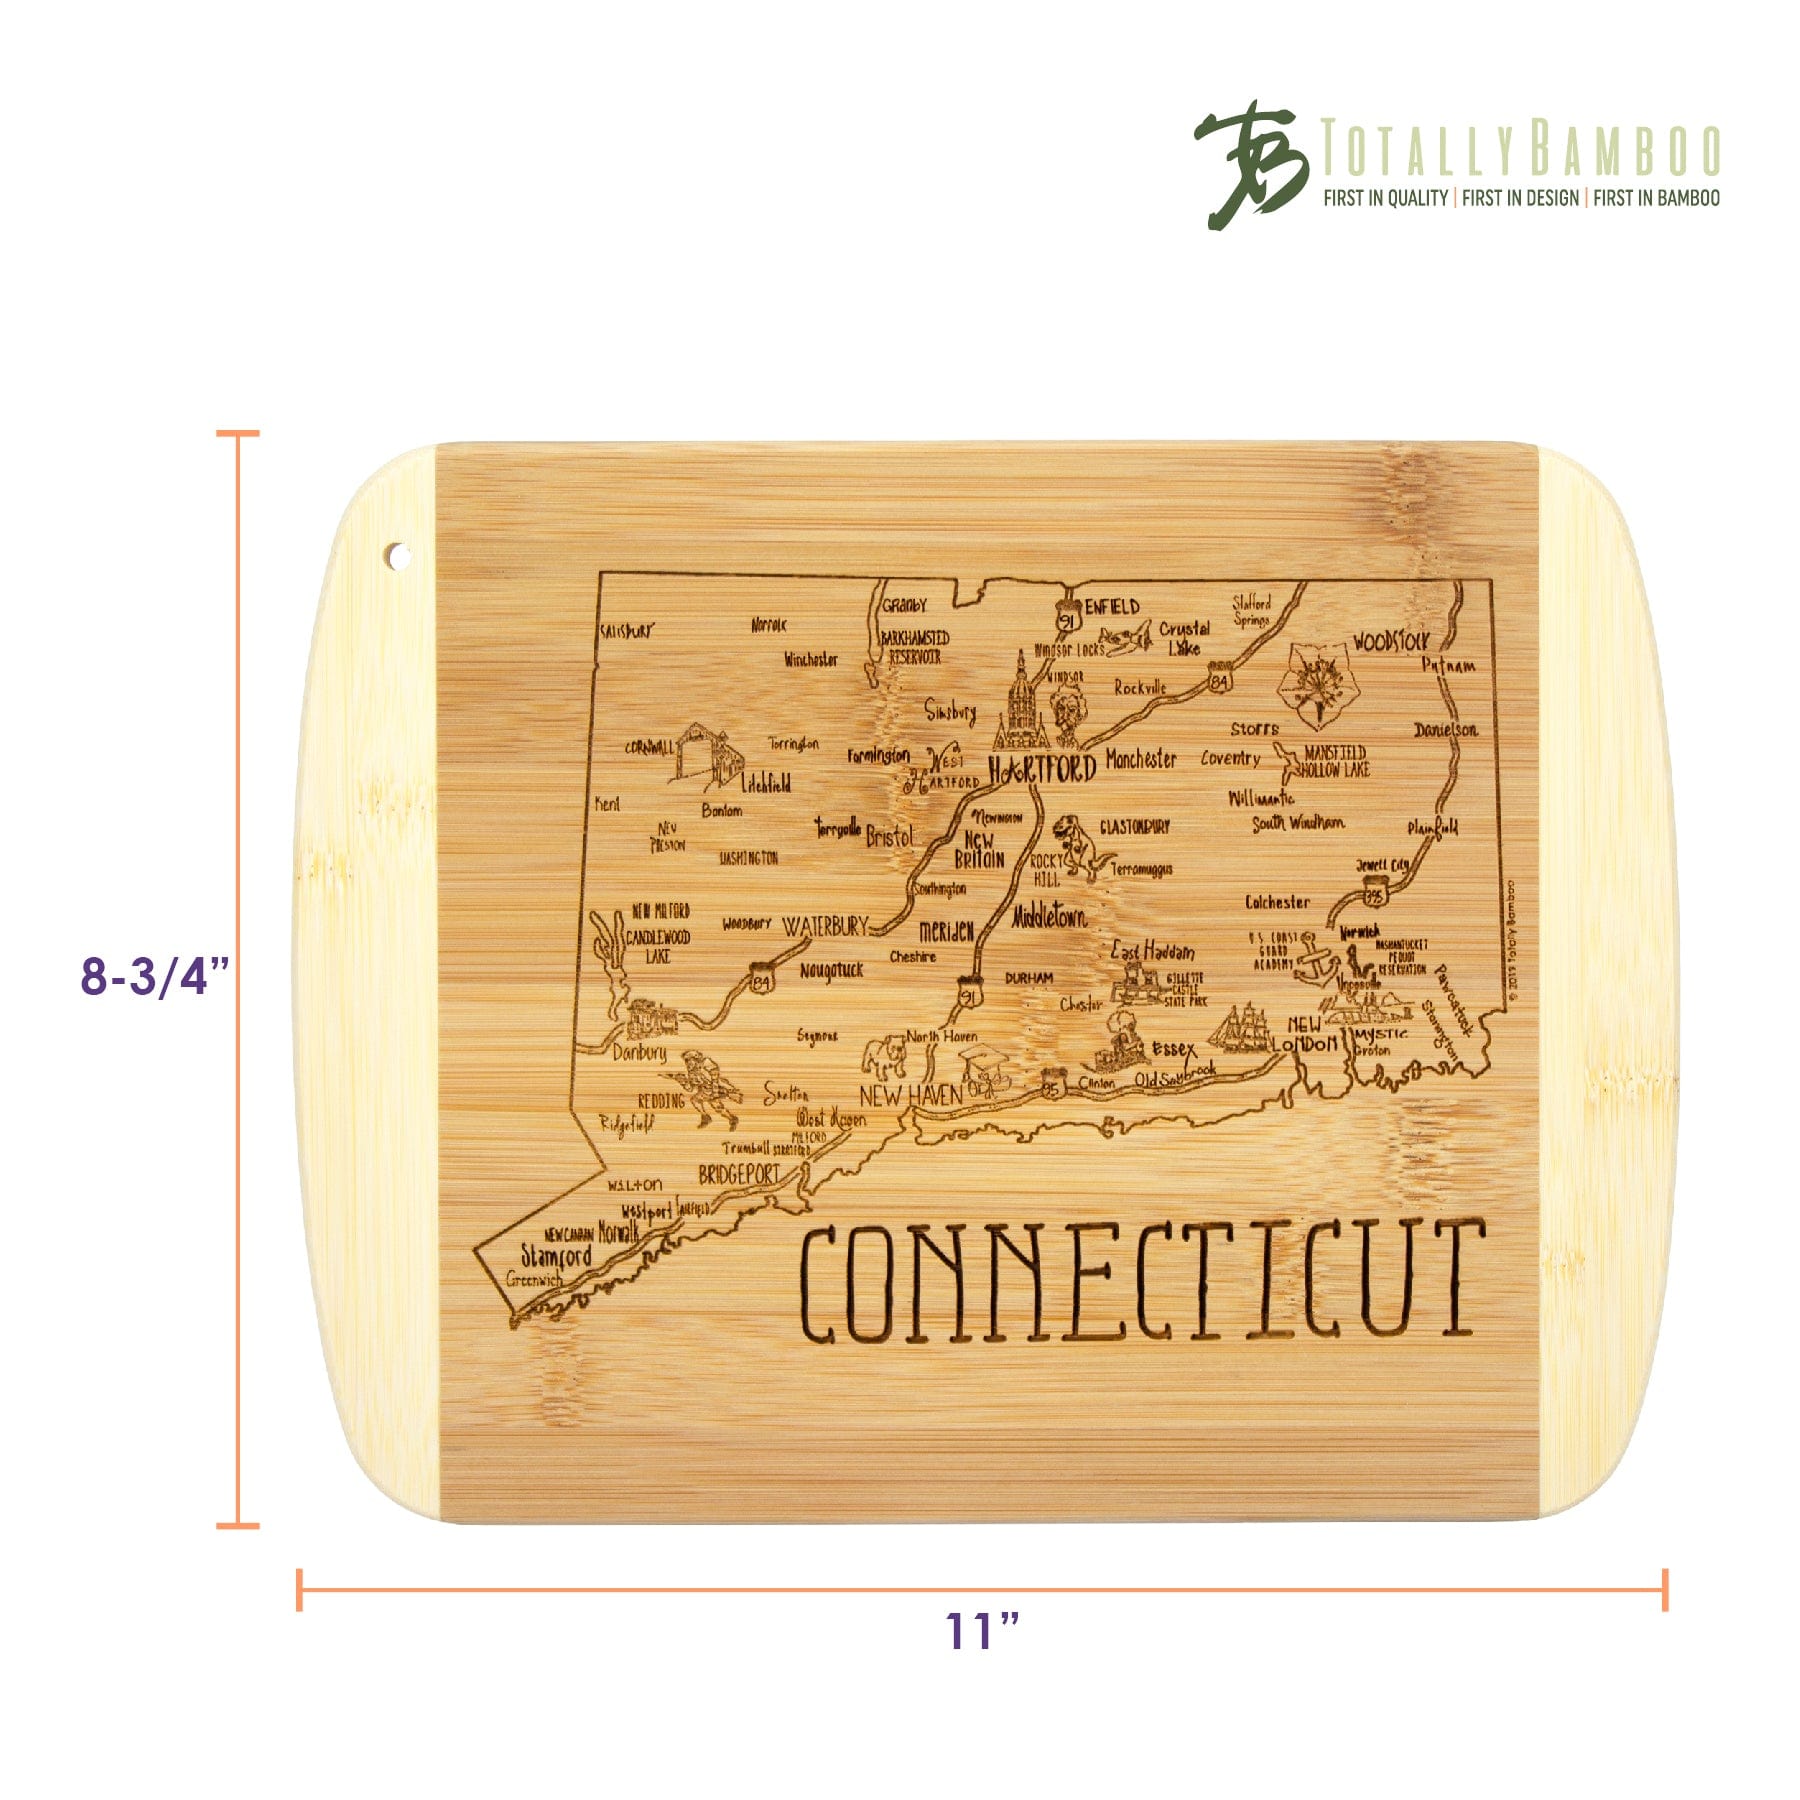 Totally Bamboo A Slice of Life Connecticut Serving and Cutting Board, 11" x 8-3/4"